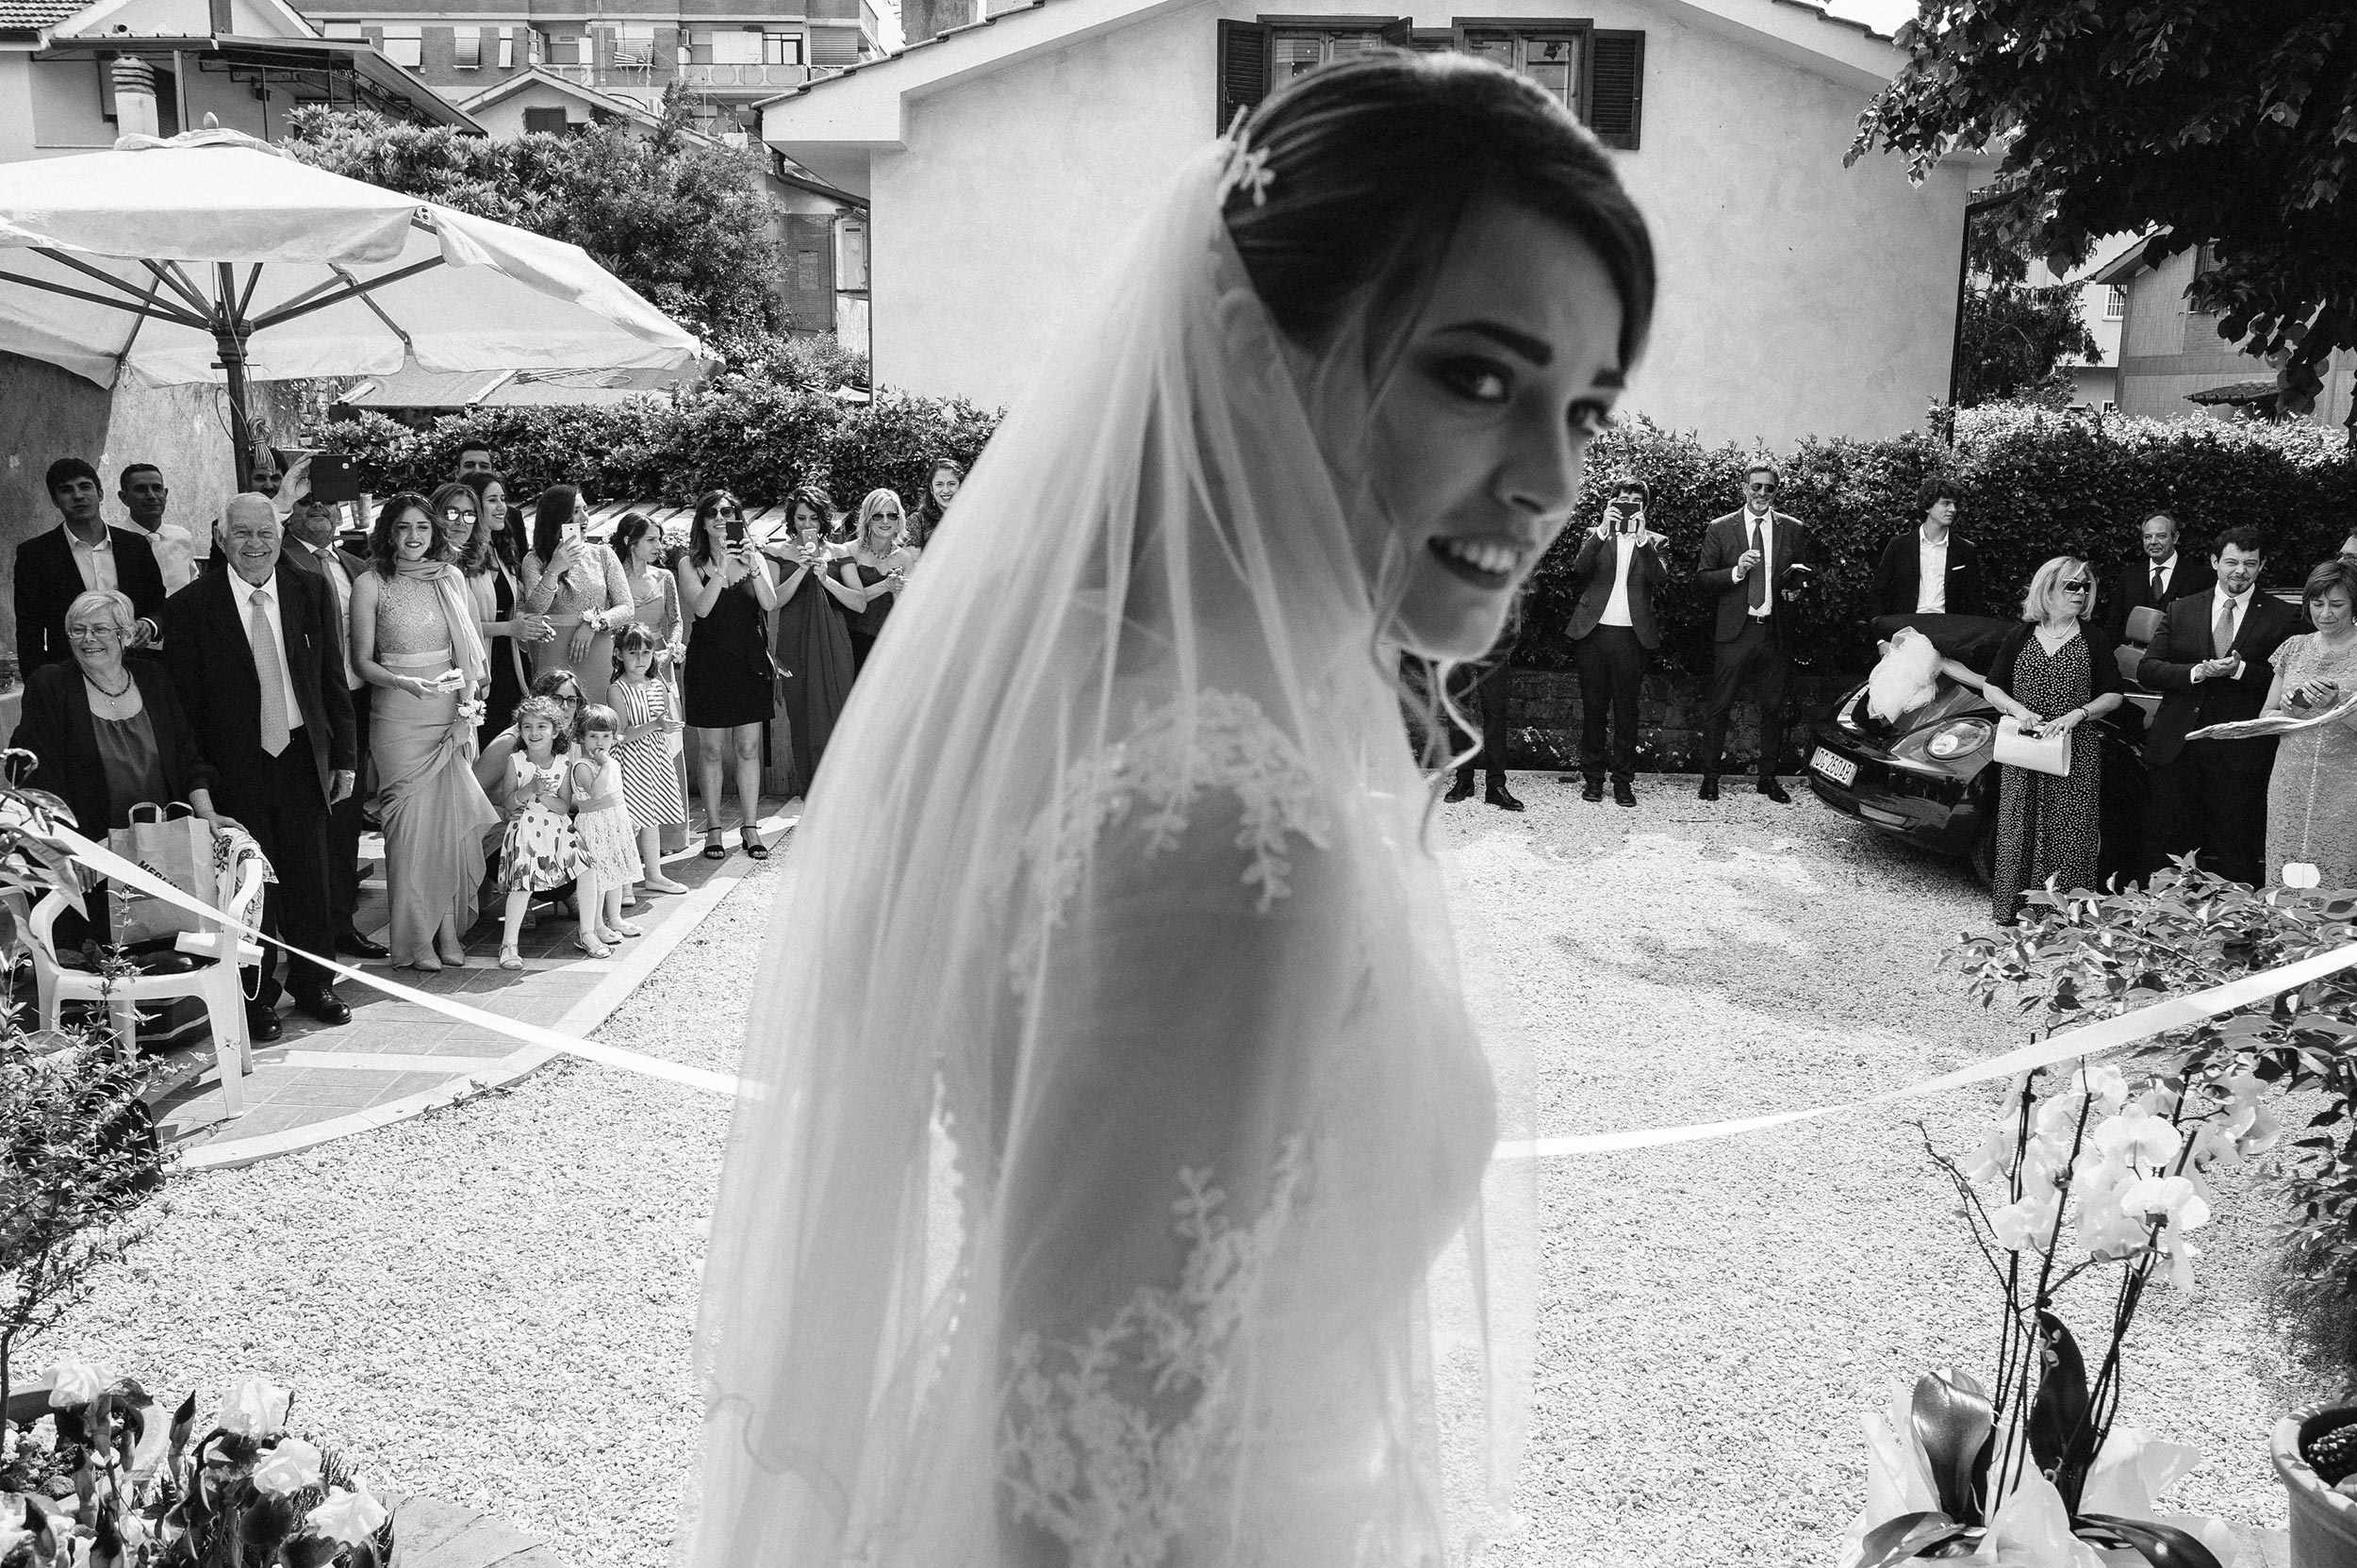 telling-stories-the-bride-black-and-white-candid-documentary-wedding-photography-by-Alessandro-Avenali.jpg